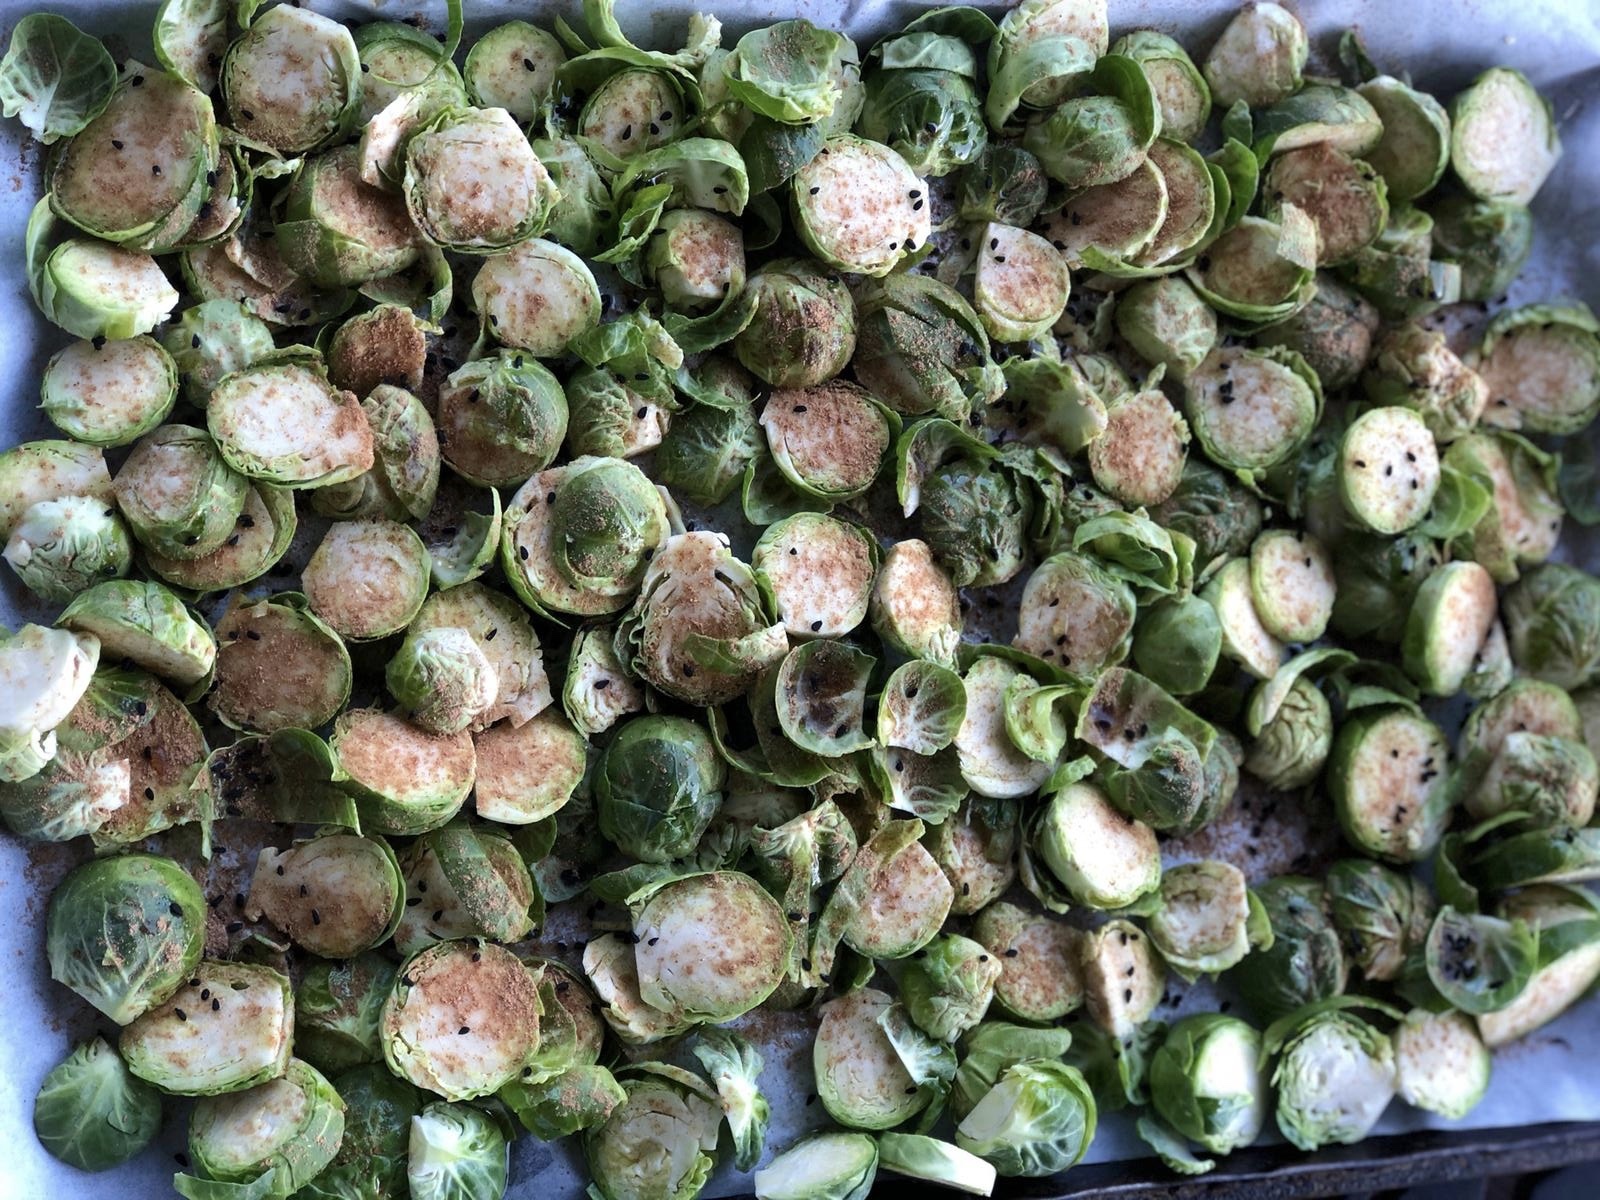 Roasted Brussel Sprouts With Chinese 5 Spice